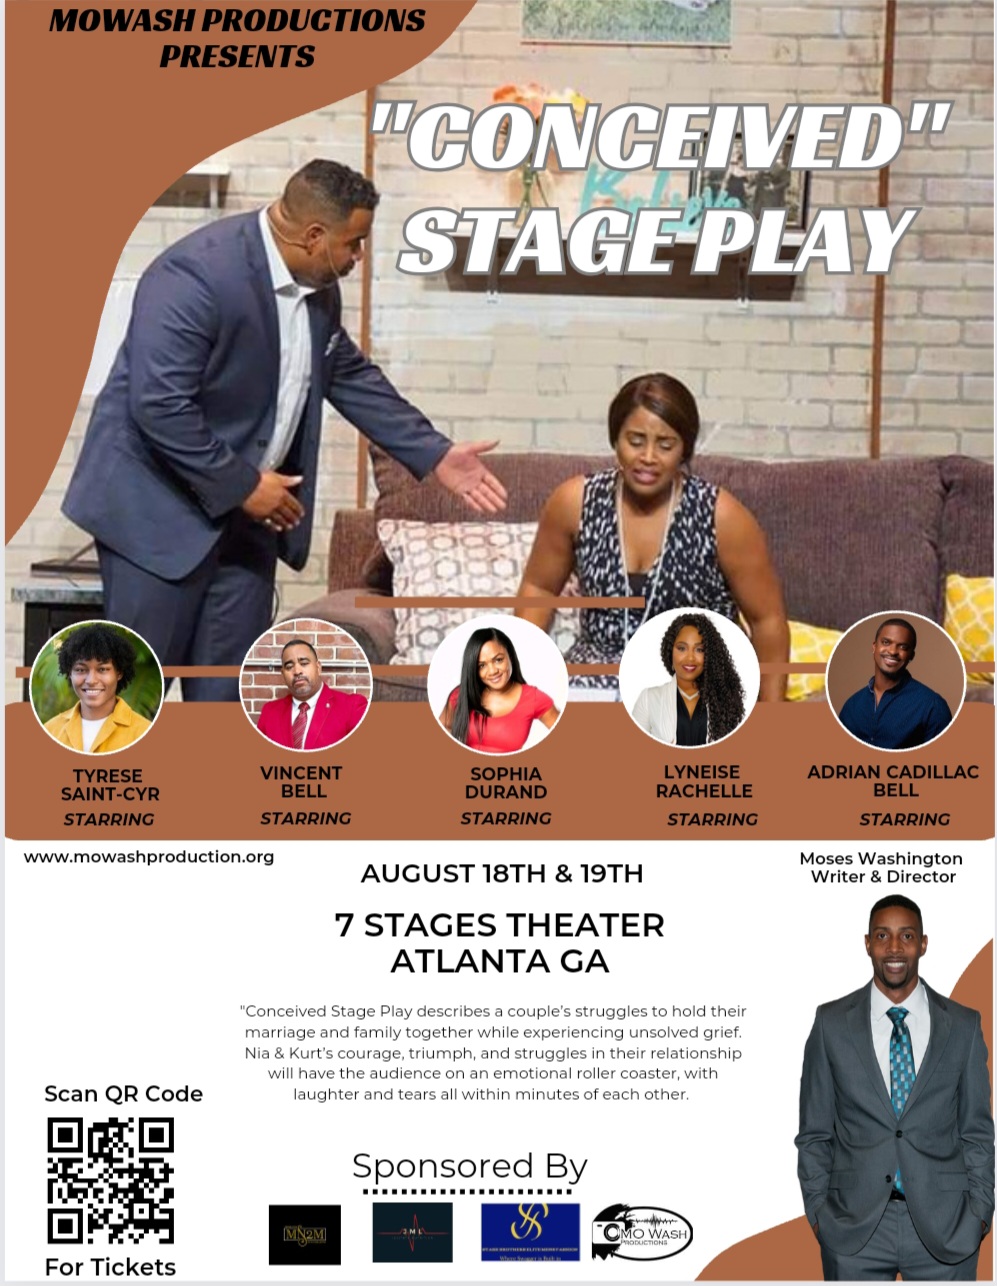 Conceived: Stage Play